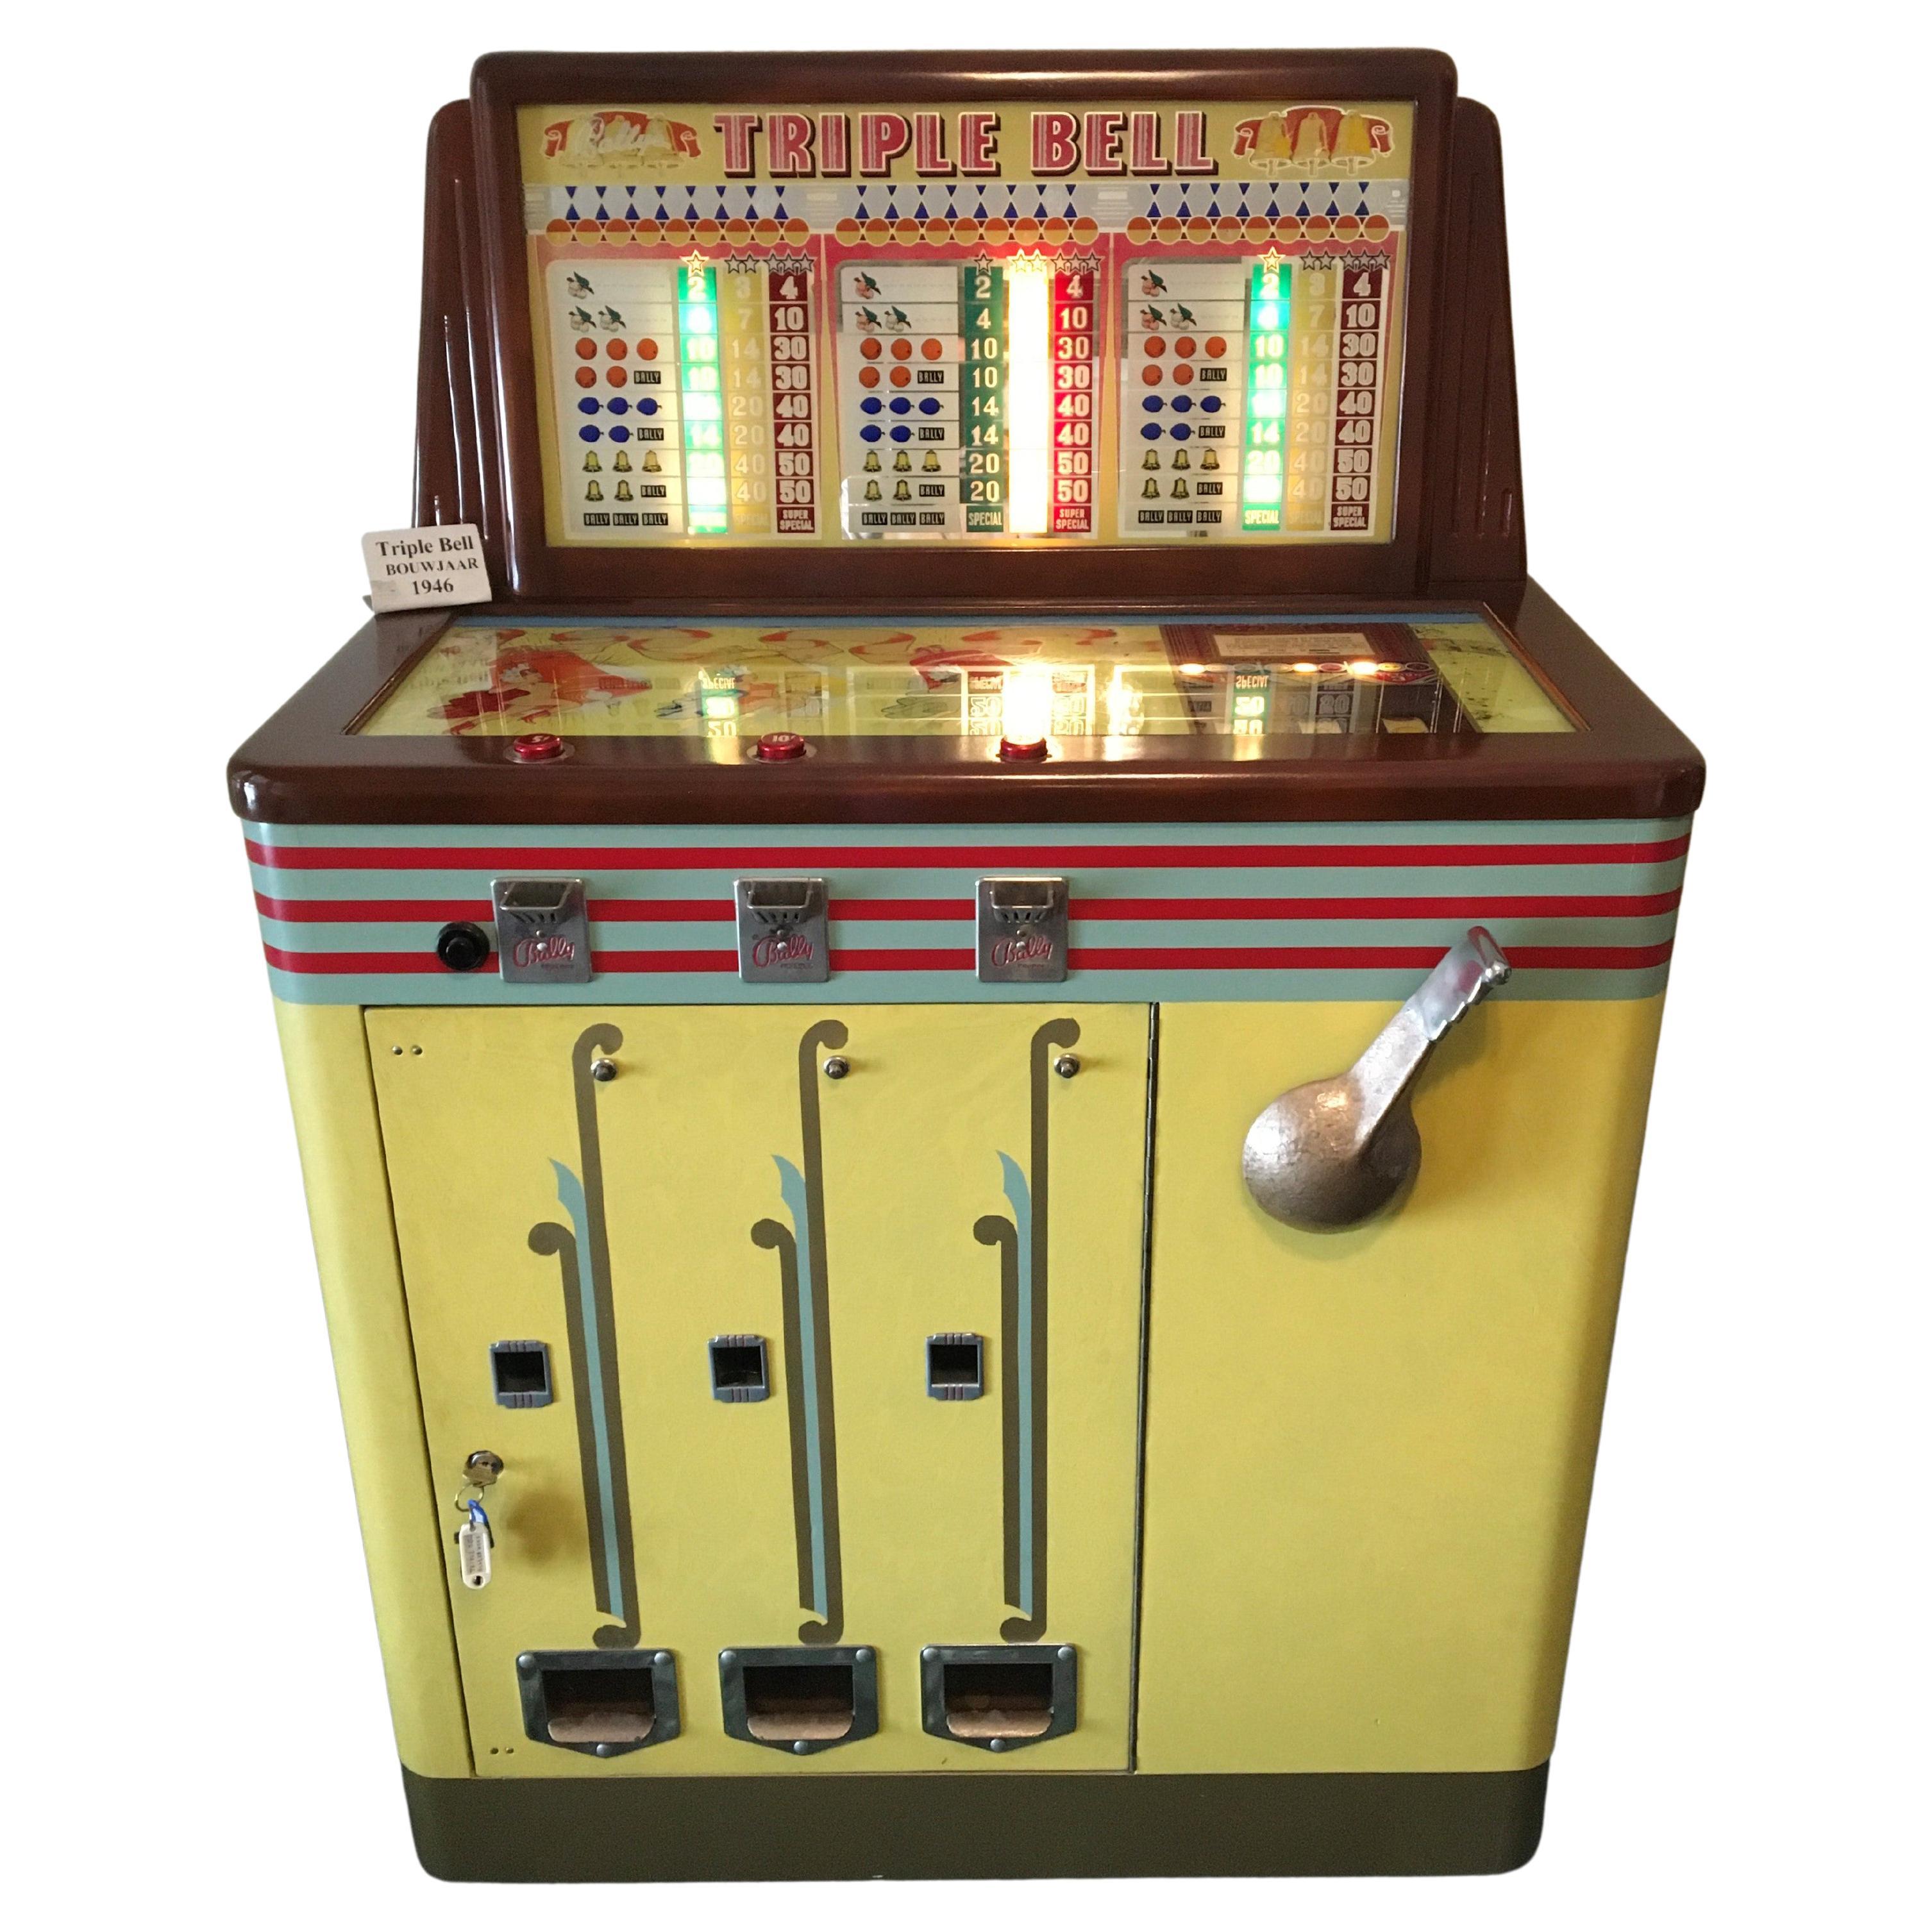 Bally Triple Bell Console Slot Machine Game, 1946 For Sale